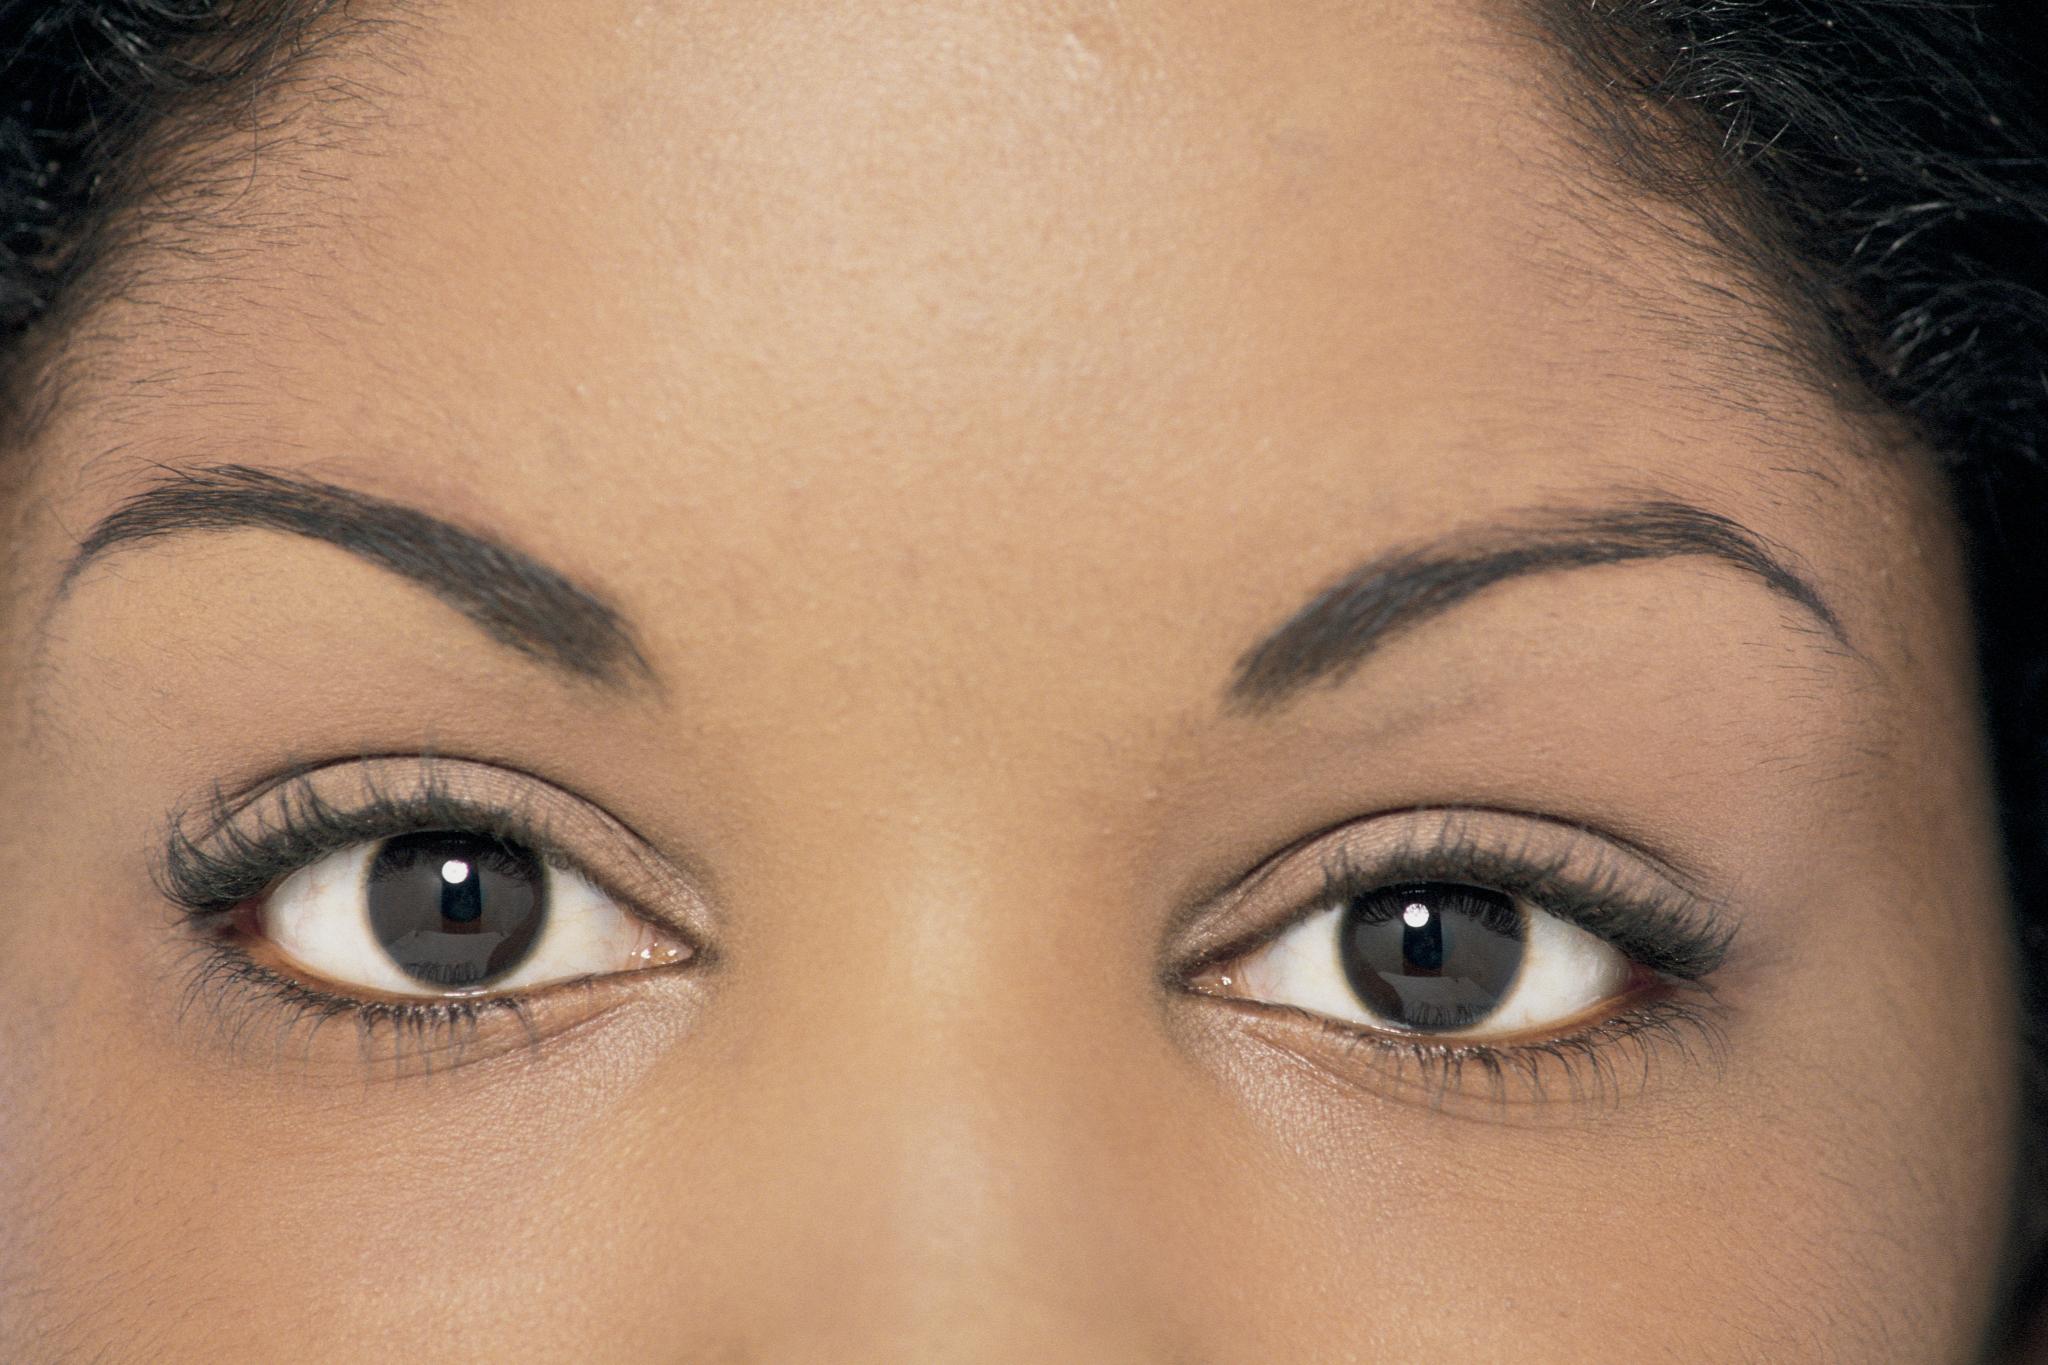 A Lazy Girl's Guide to DIY Eyebrow Shaping